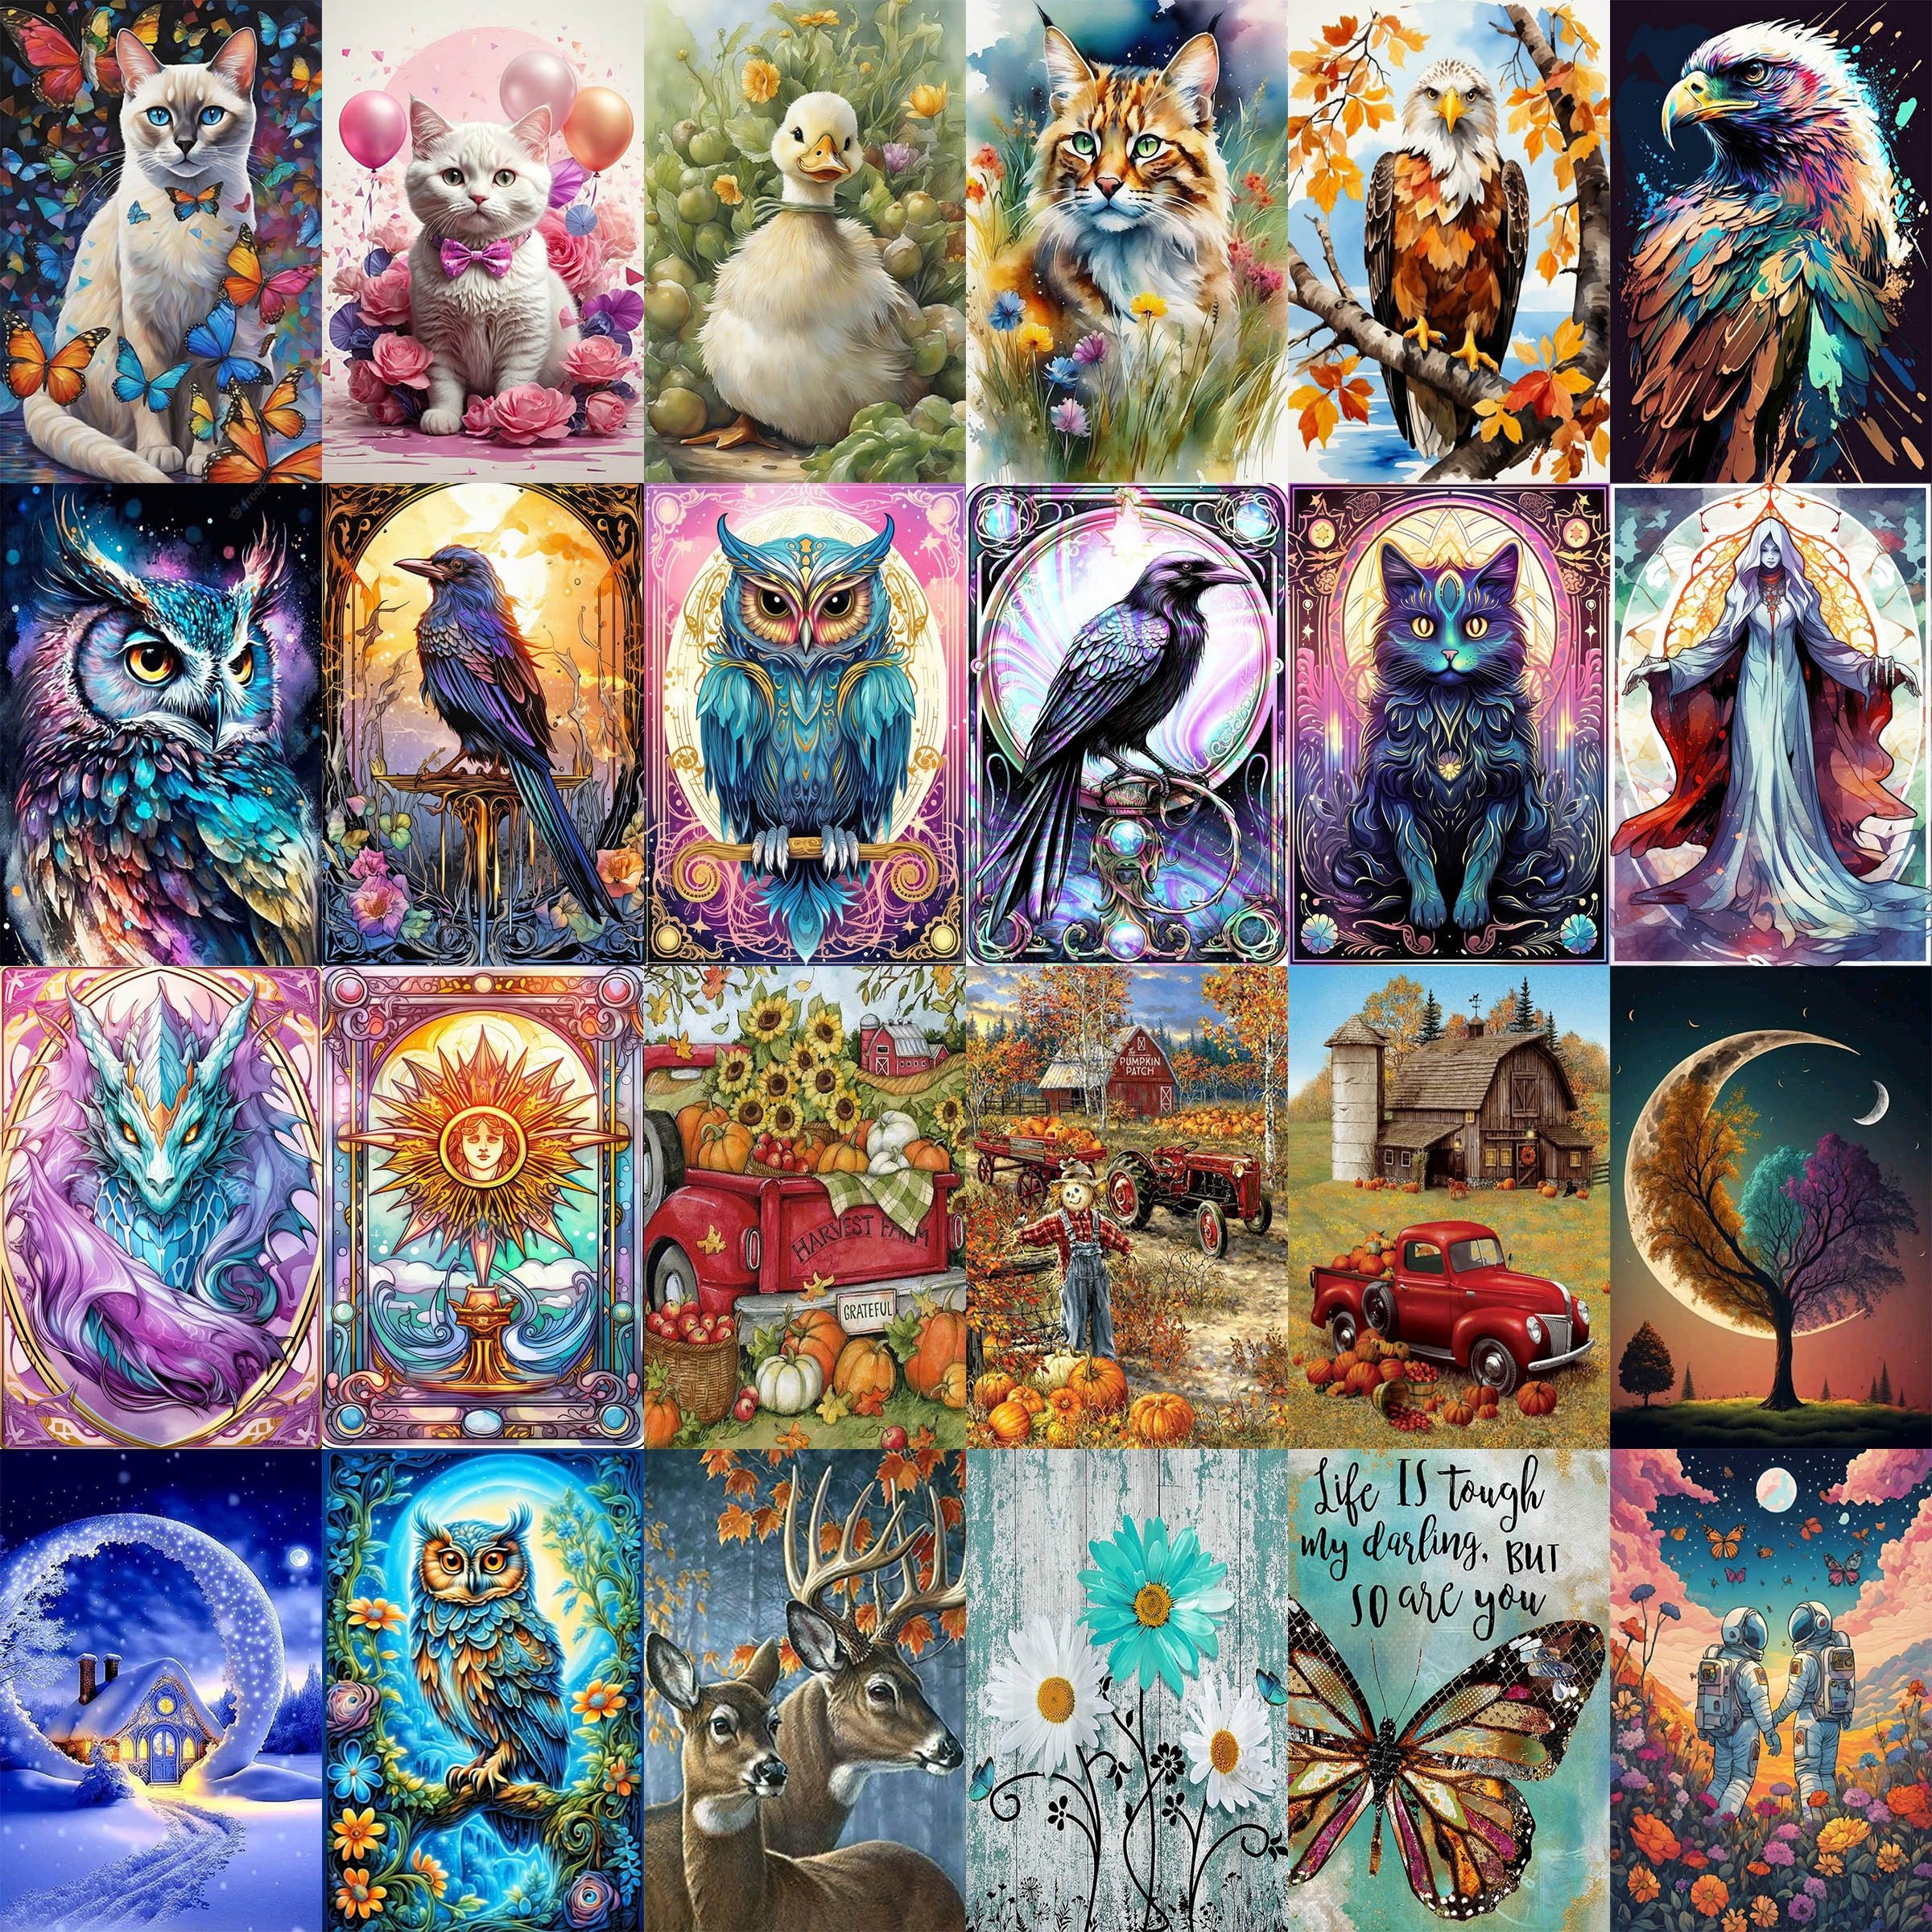 DIY 5D Diamond Painting Wolf Owl Dreamcatcher Diamond Mosaic Embroidery  With Photo Frame Animal Picture Home Wall Decoration